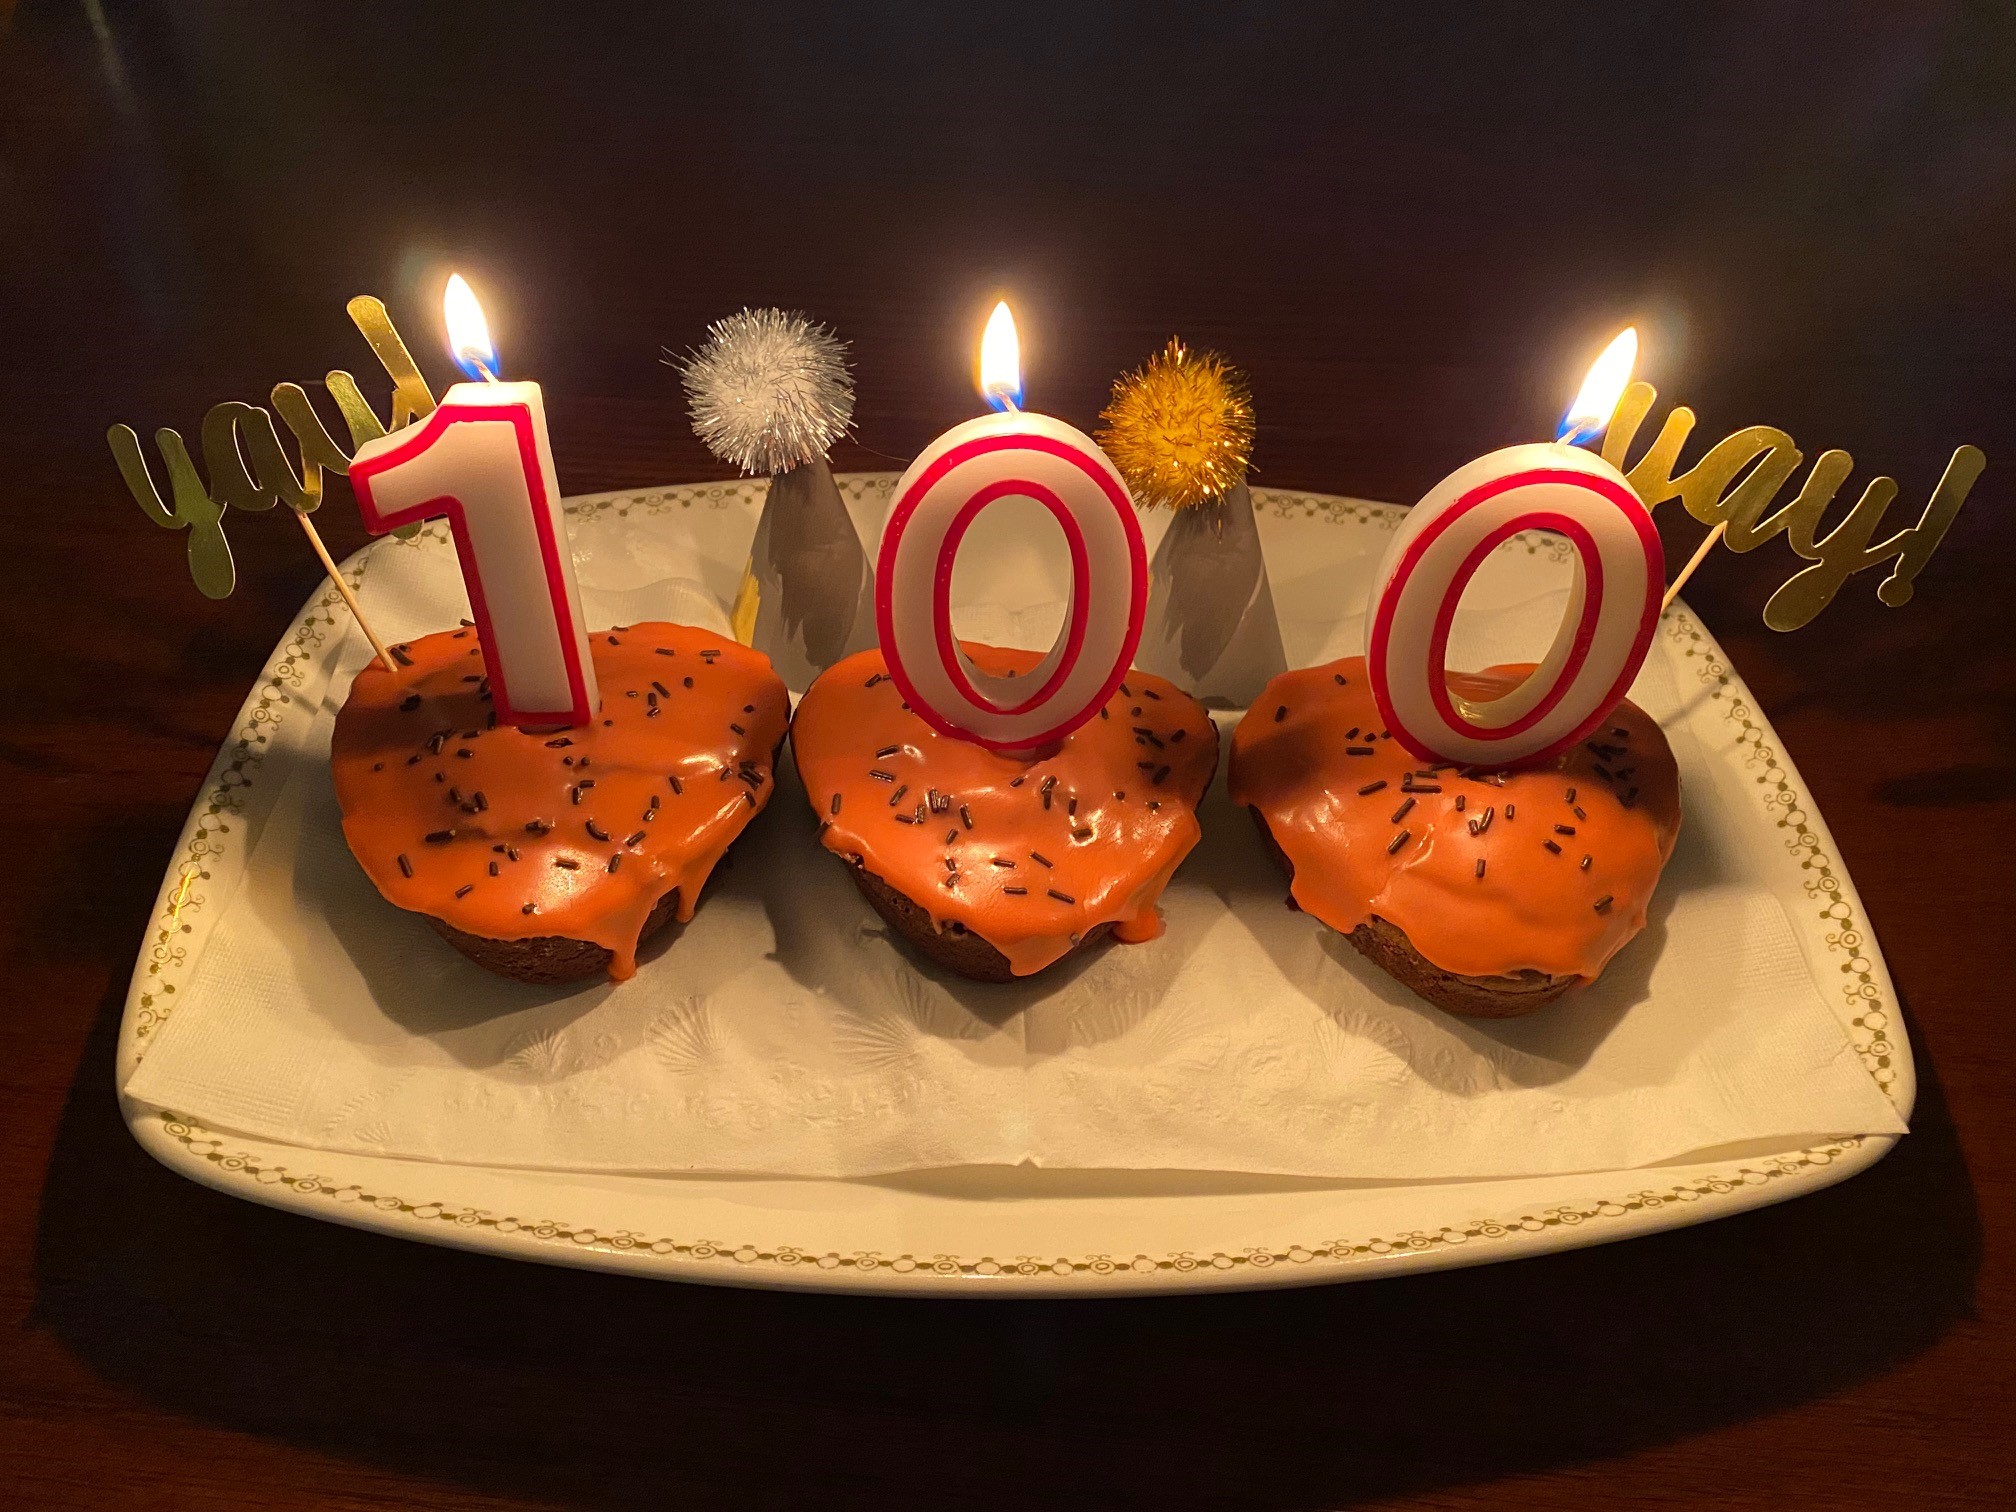 Celebrating 100 Posts with a Whole Lotta Love!